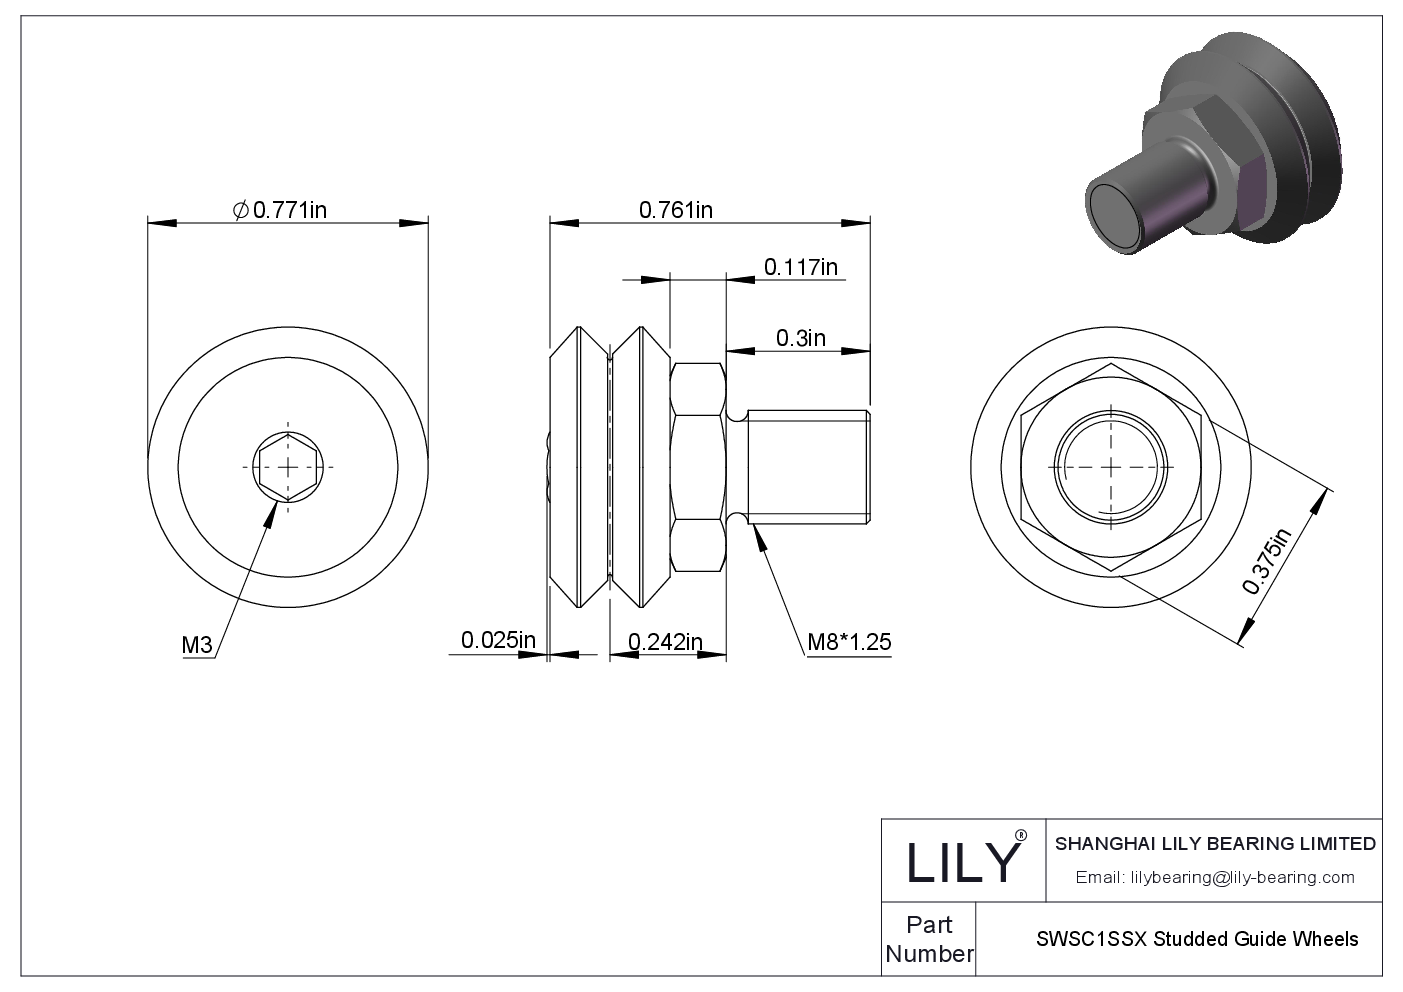 SWSC1SSX Studded Guide Wheels cad drawing